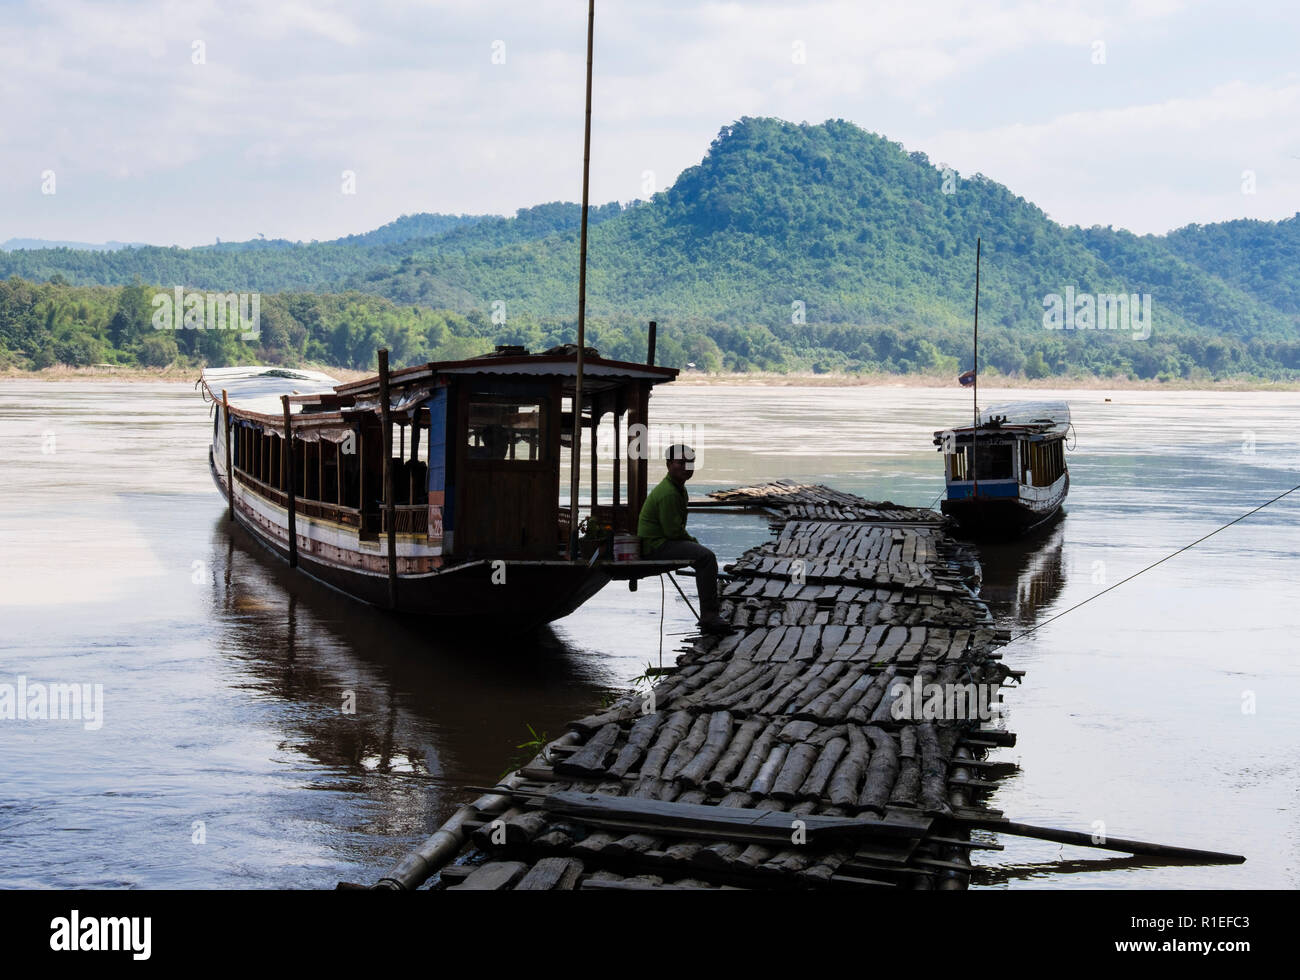 Boatman waits by tourist boats moored by flimsy wooden jetty at Tham Ting Caves on Mekong River. Pak Ou, Luang Prabang province, Laos, Asia Stock Photo